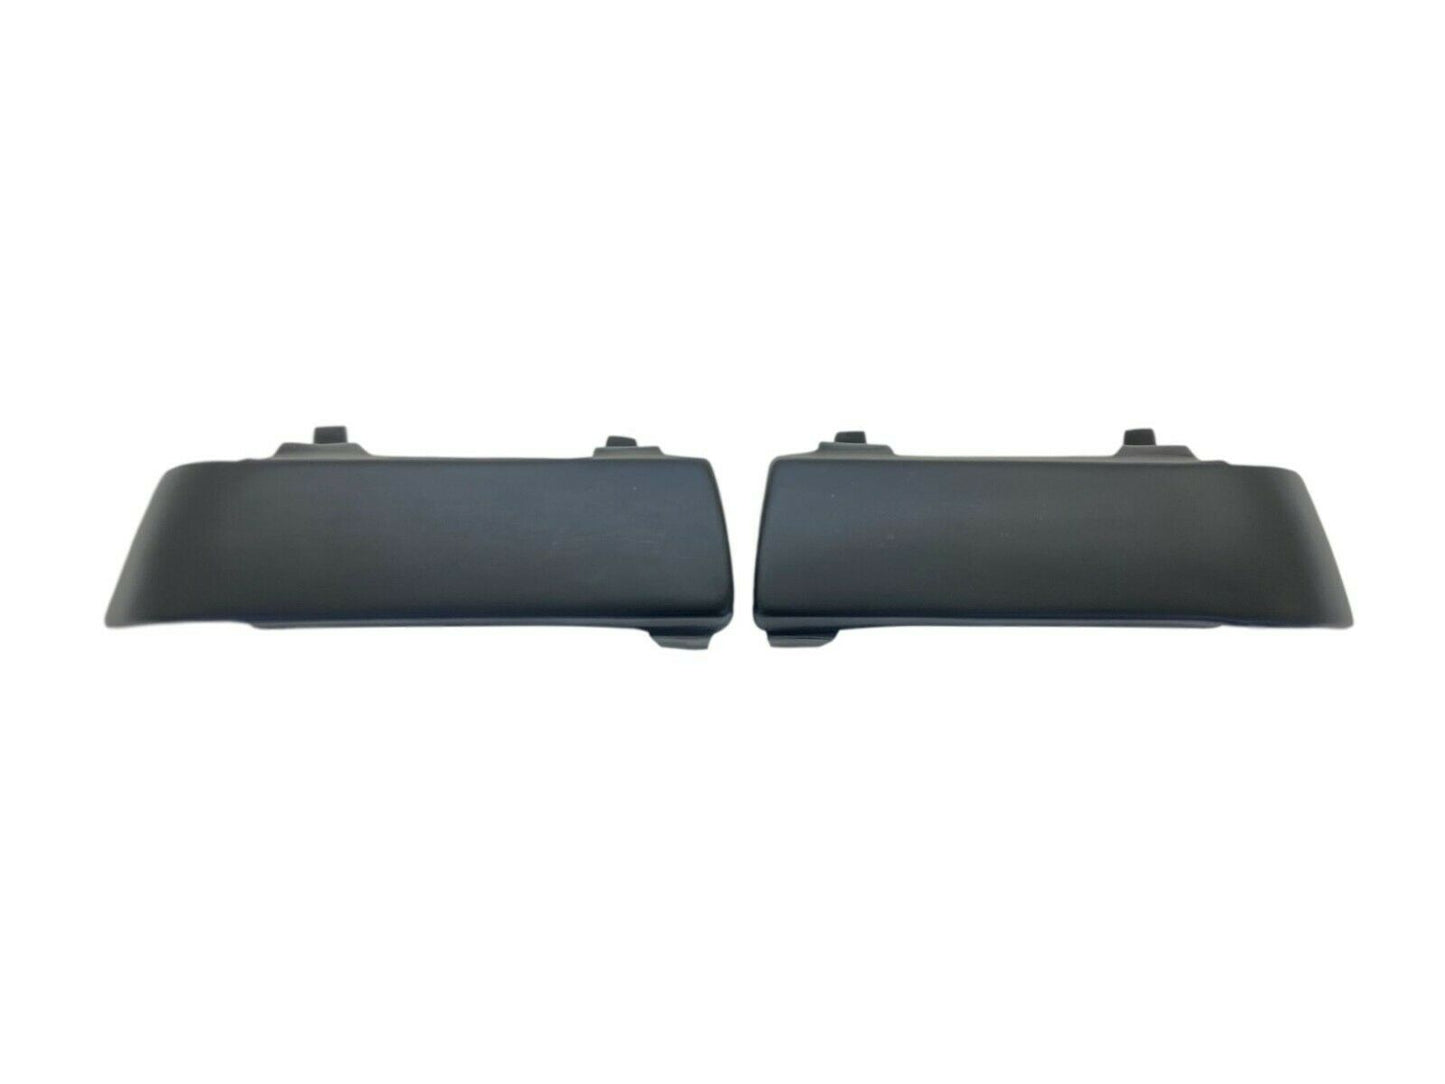 Front Headlight Delete Covers Panels Weight Reduction (Fits BMW E36 Coupe)